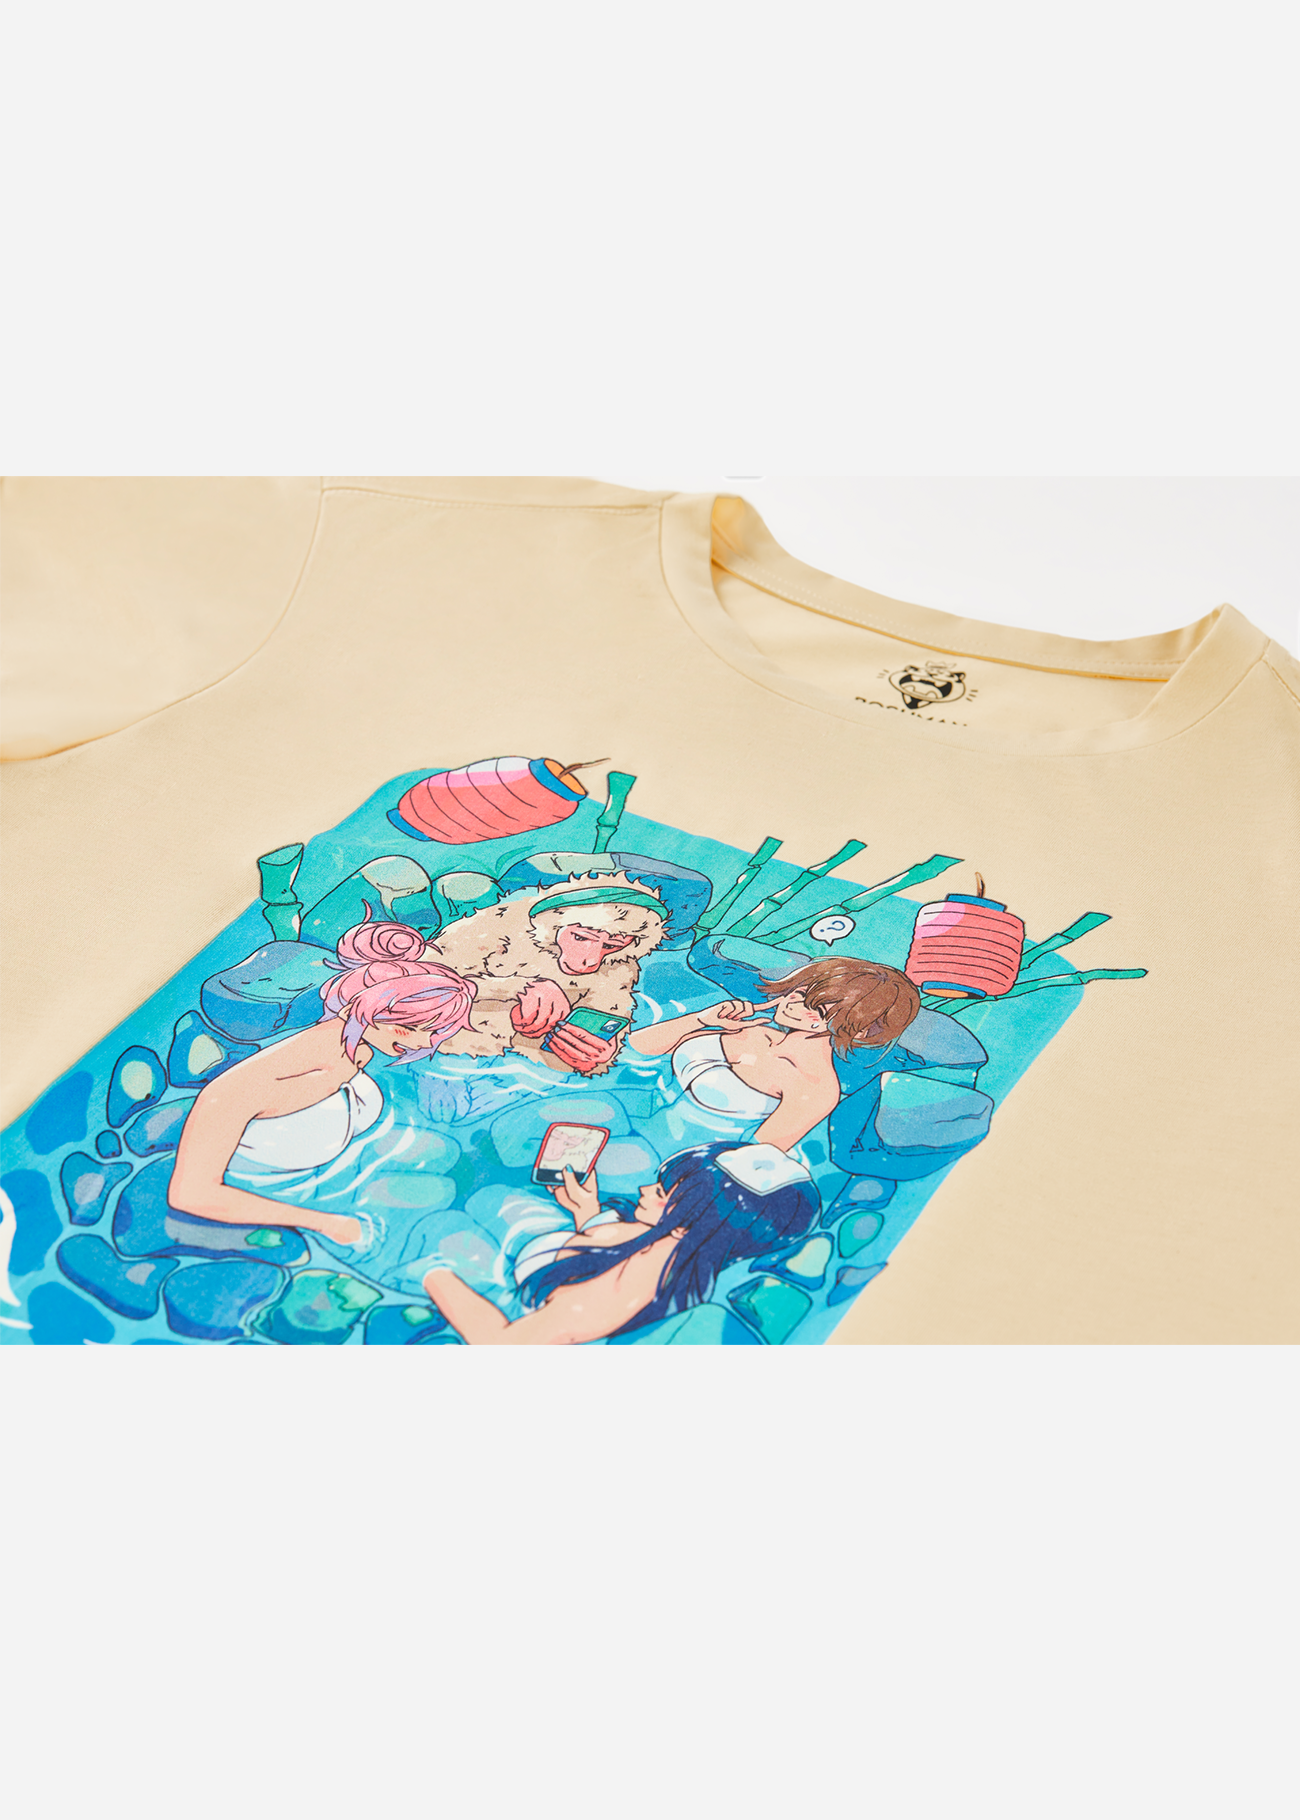 An anime t shirt front photo depicting 3 girls and a monkey sharing a moment in the hotsprings together